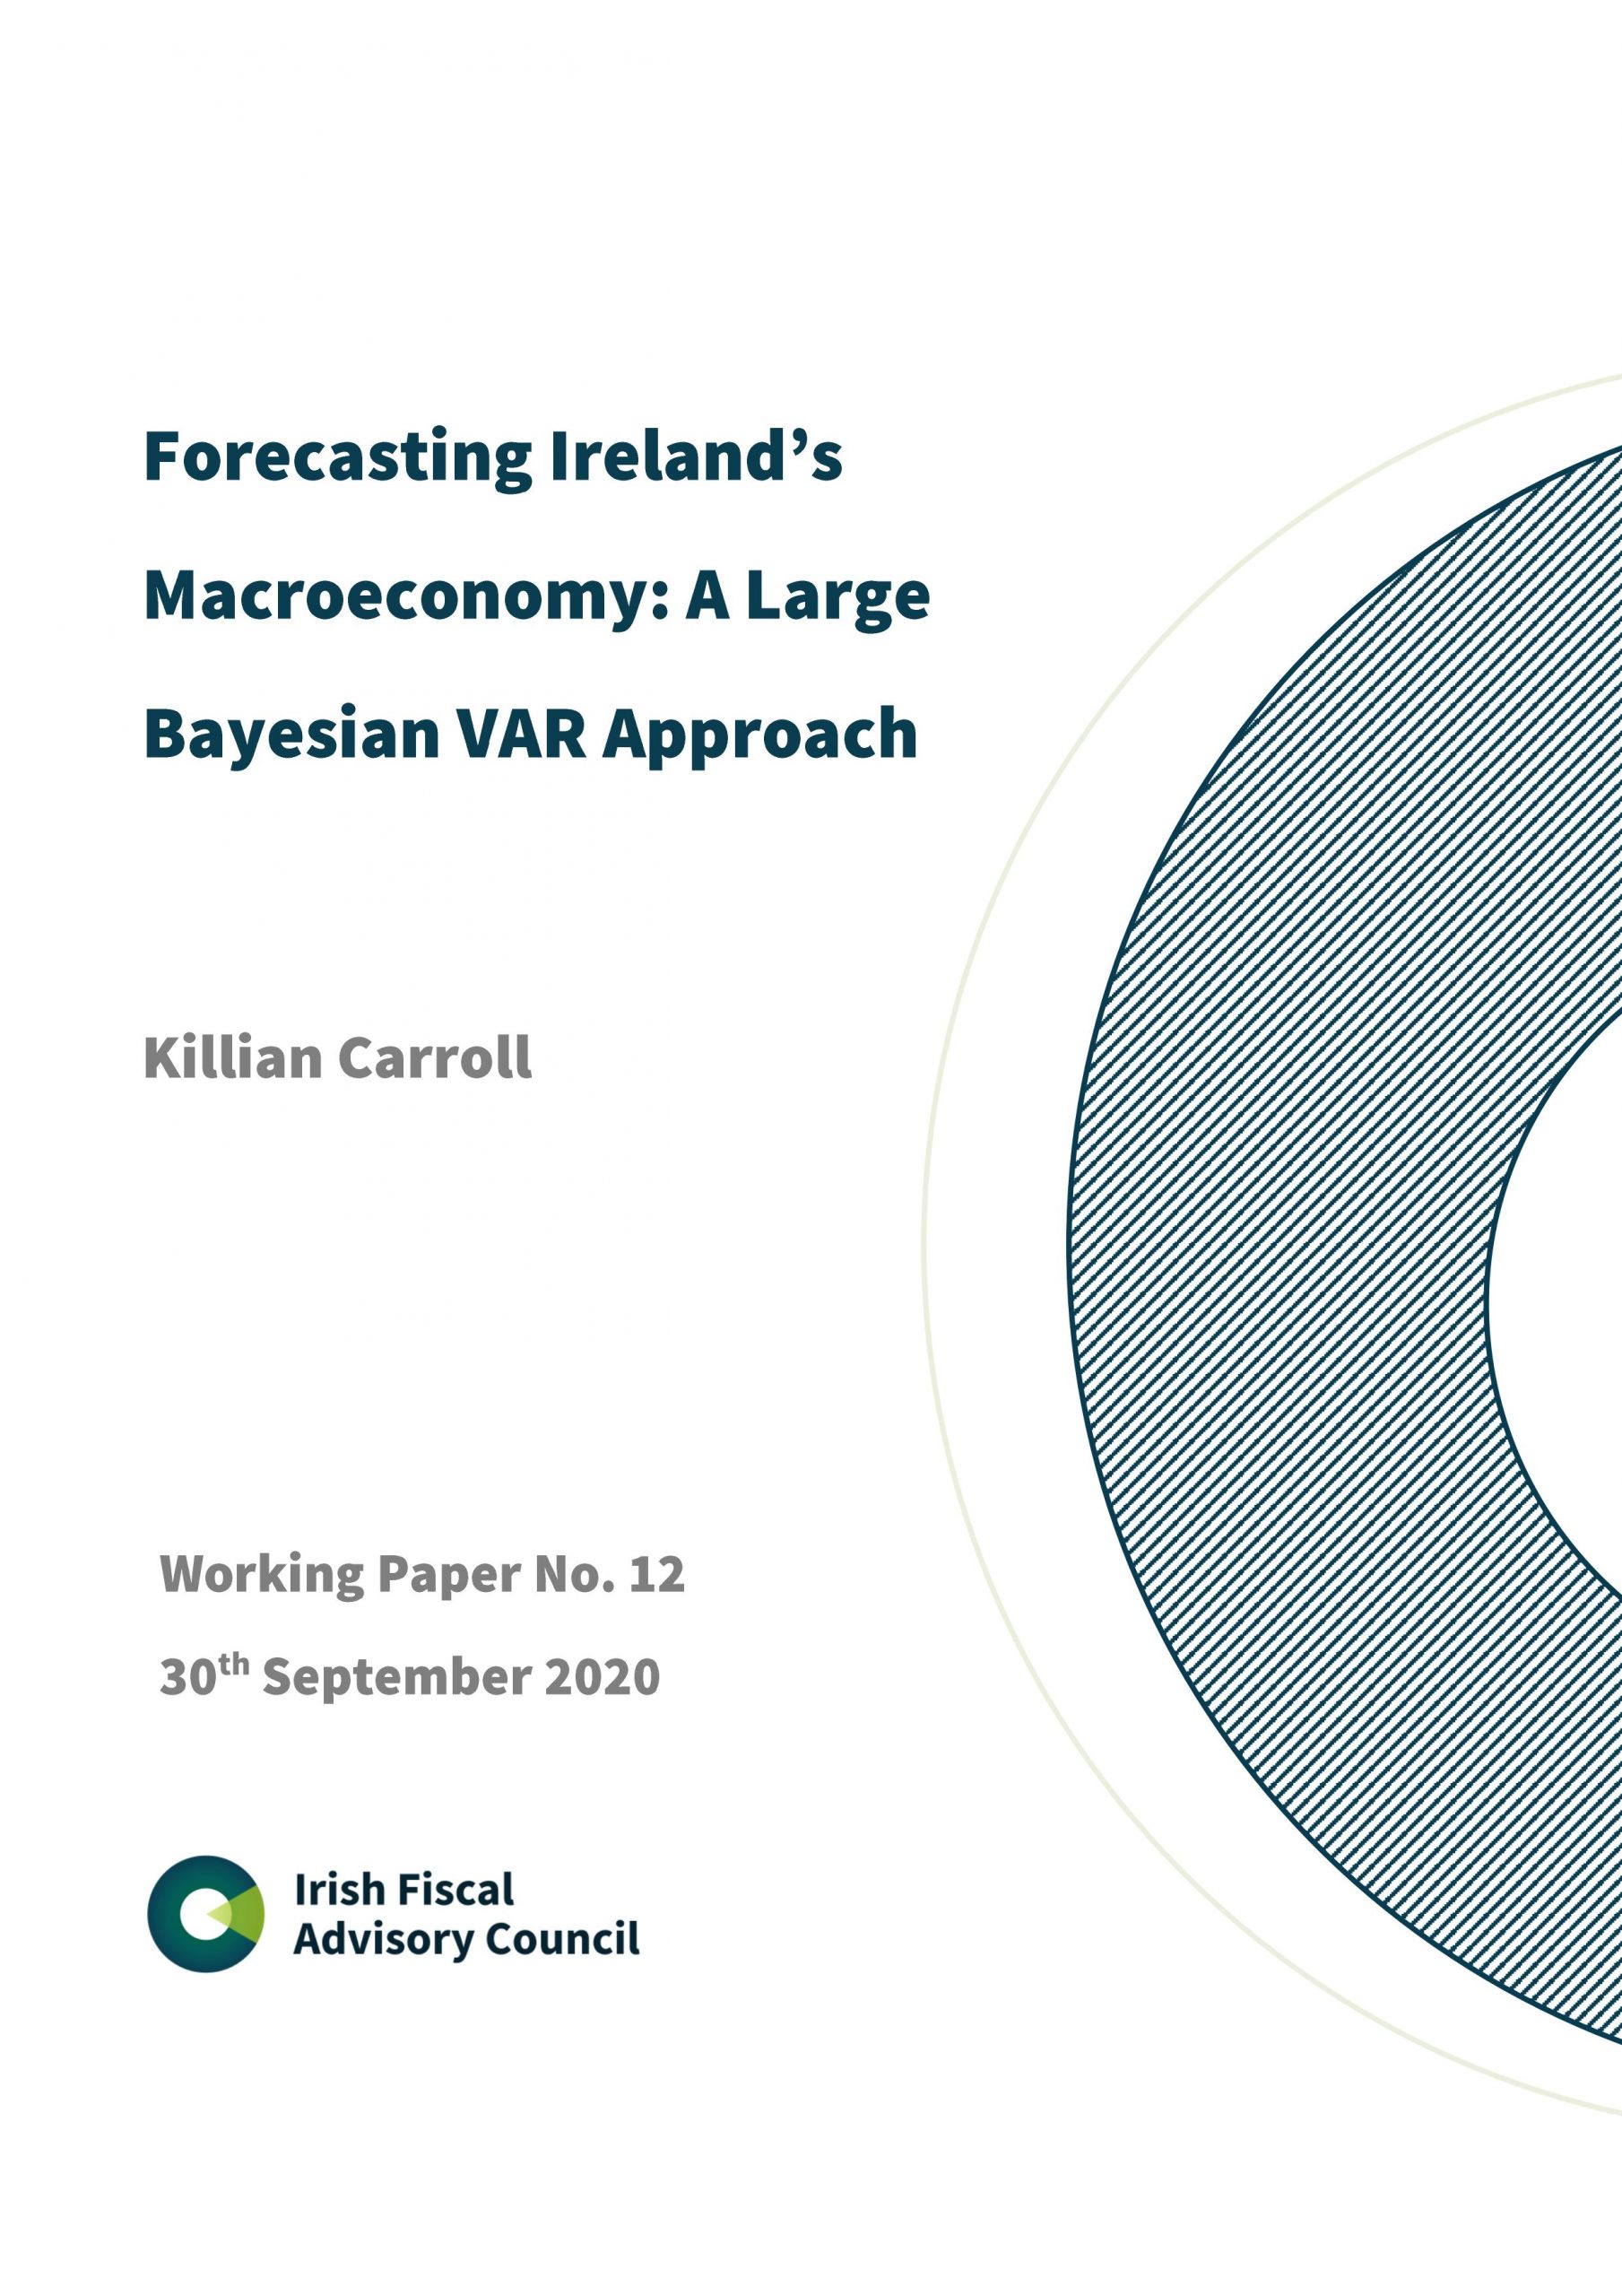 Working Paper No. 12. Forecasting Ireland's Macroeconomy: A Large Bayesian VAR Approach 